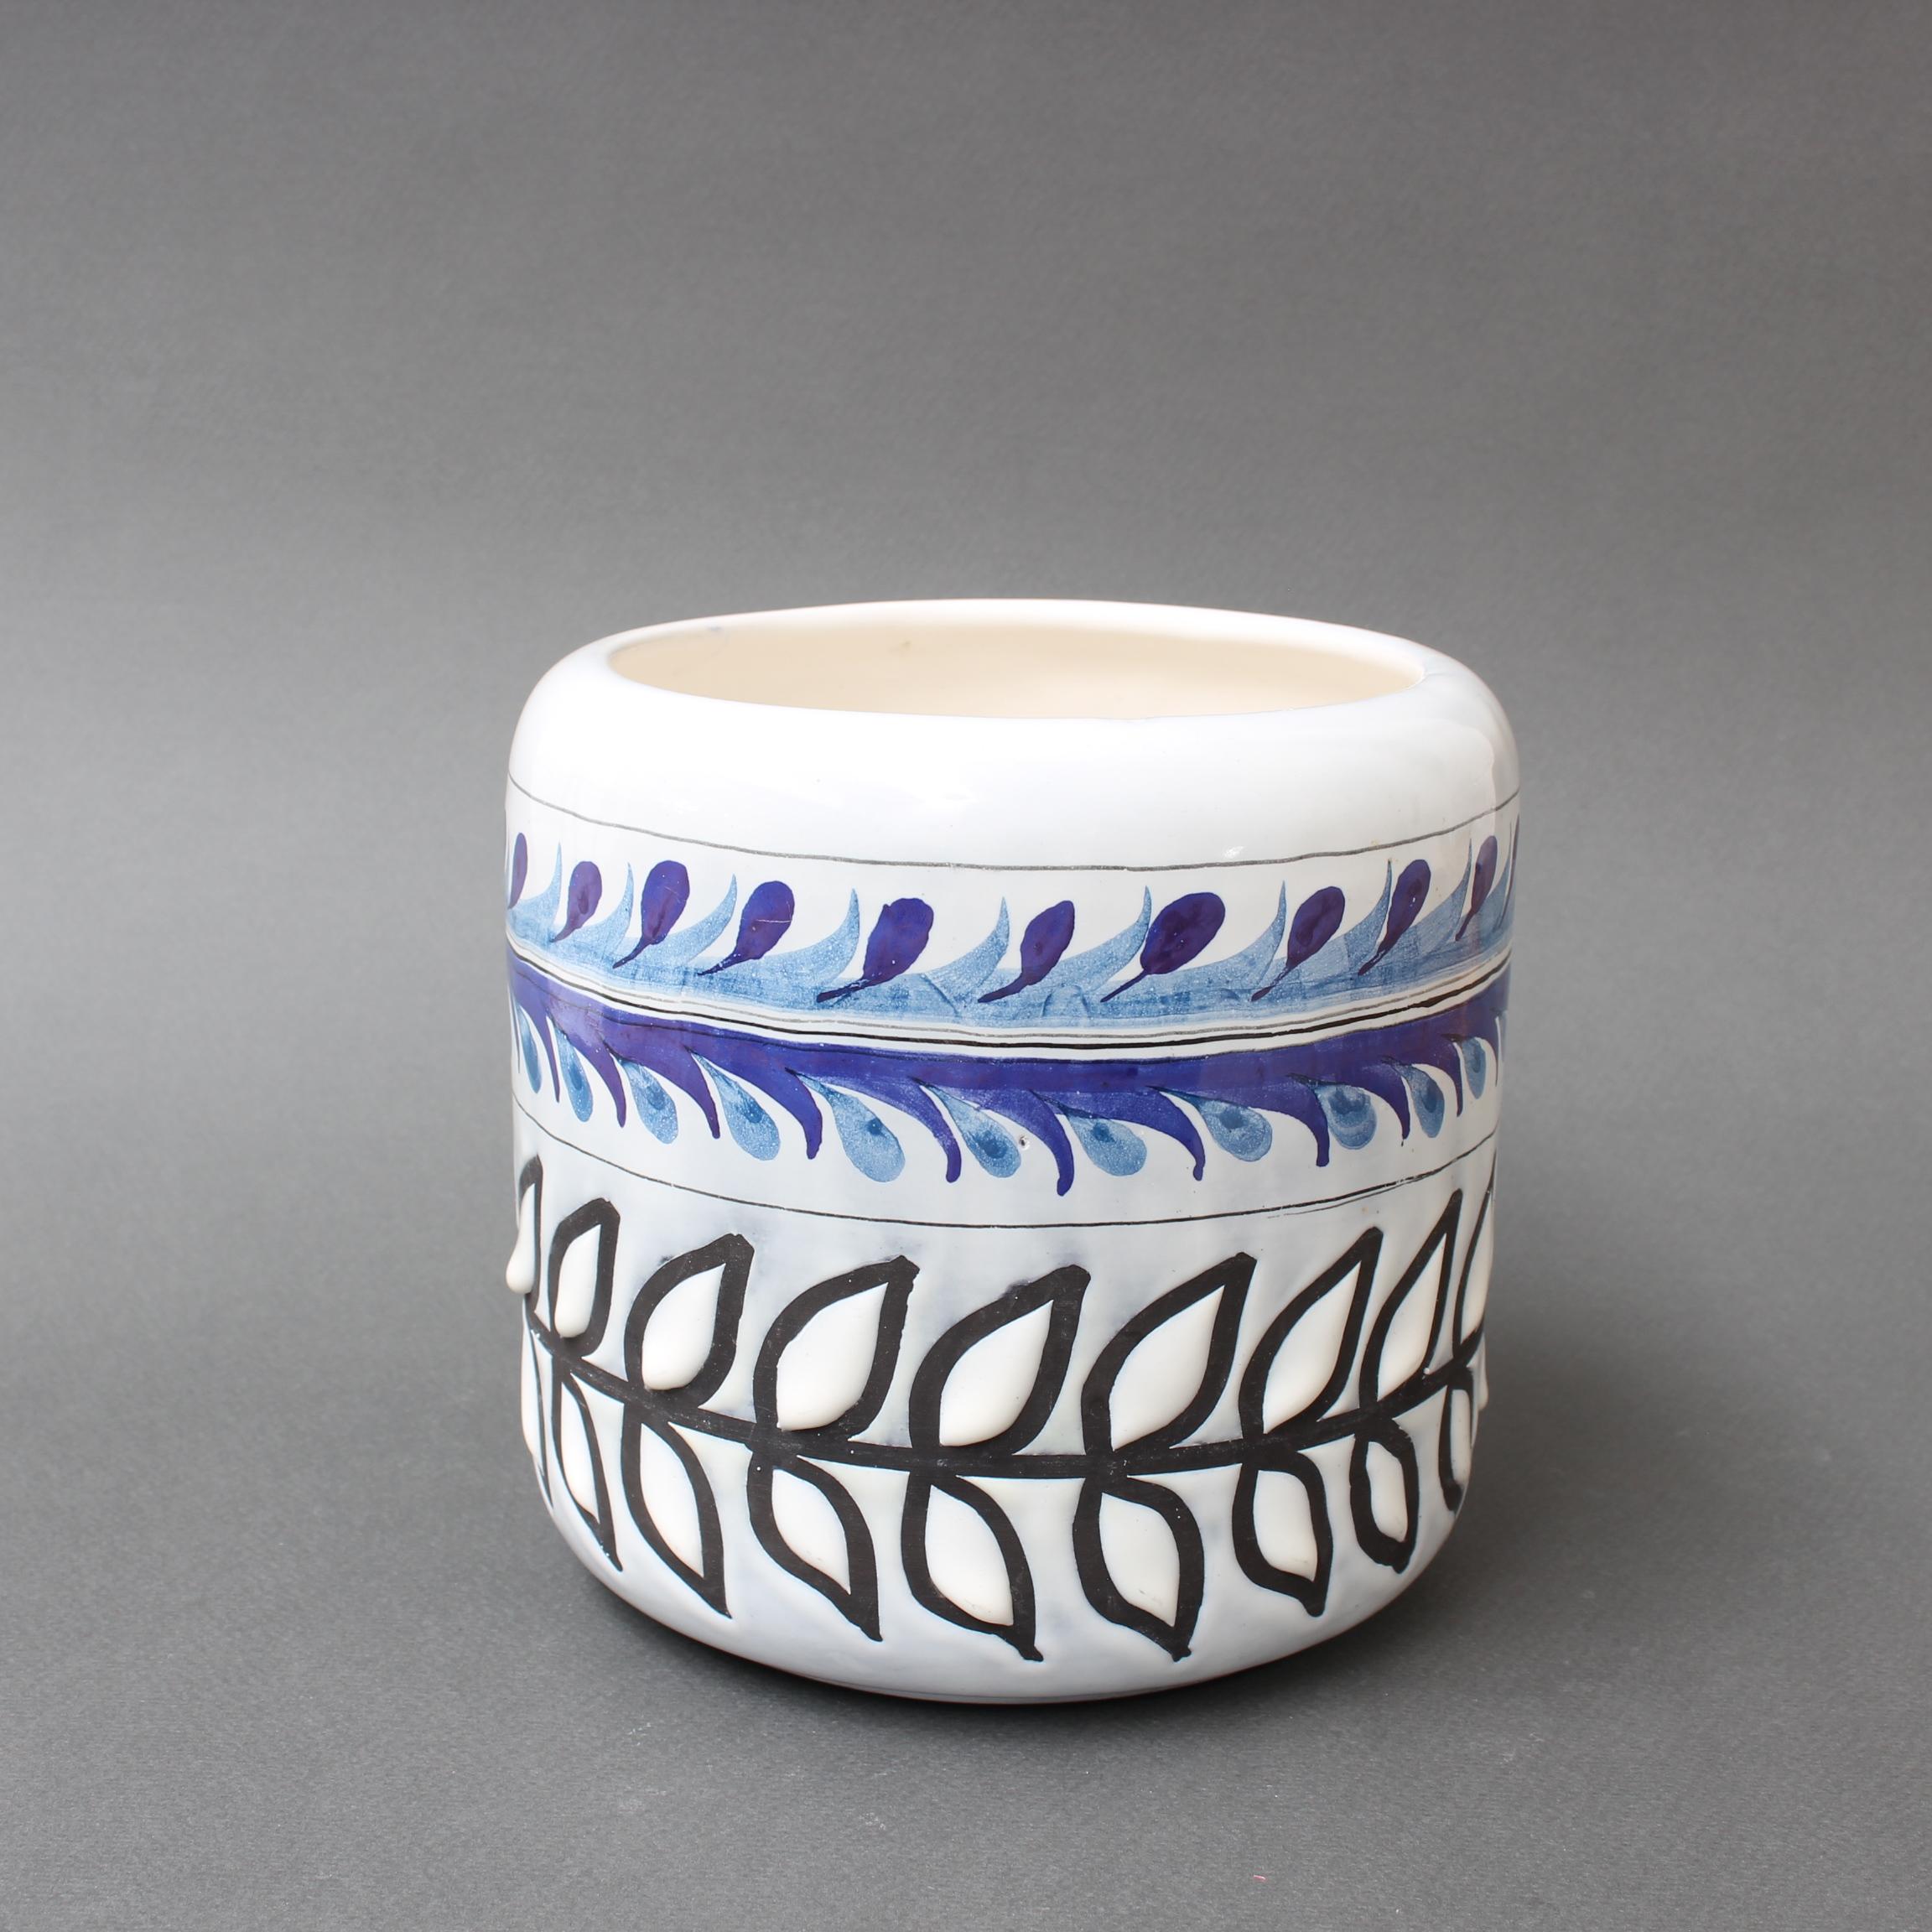 Vintage French ceramic cachepôt by Roger Capron (circa 1960s). A luscious creamy white base with a top band in a repeating pattern in lovely blues; below that another with leaf motif contrasts in black and white. The white of the leaves consist of